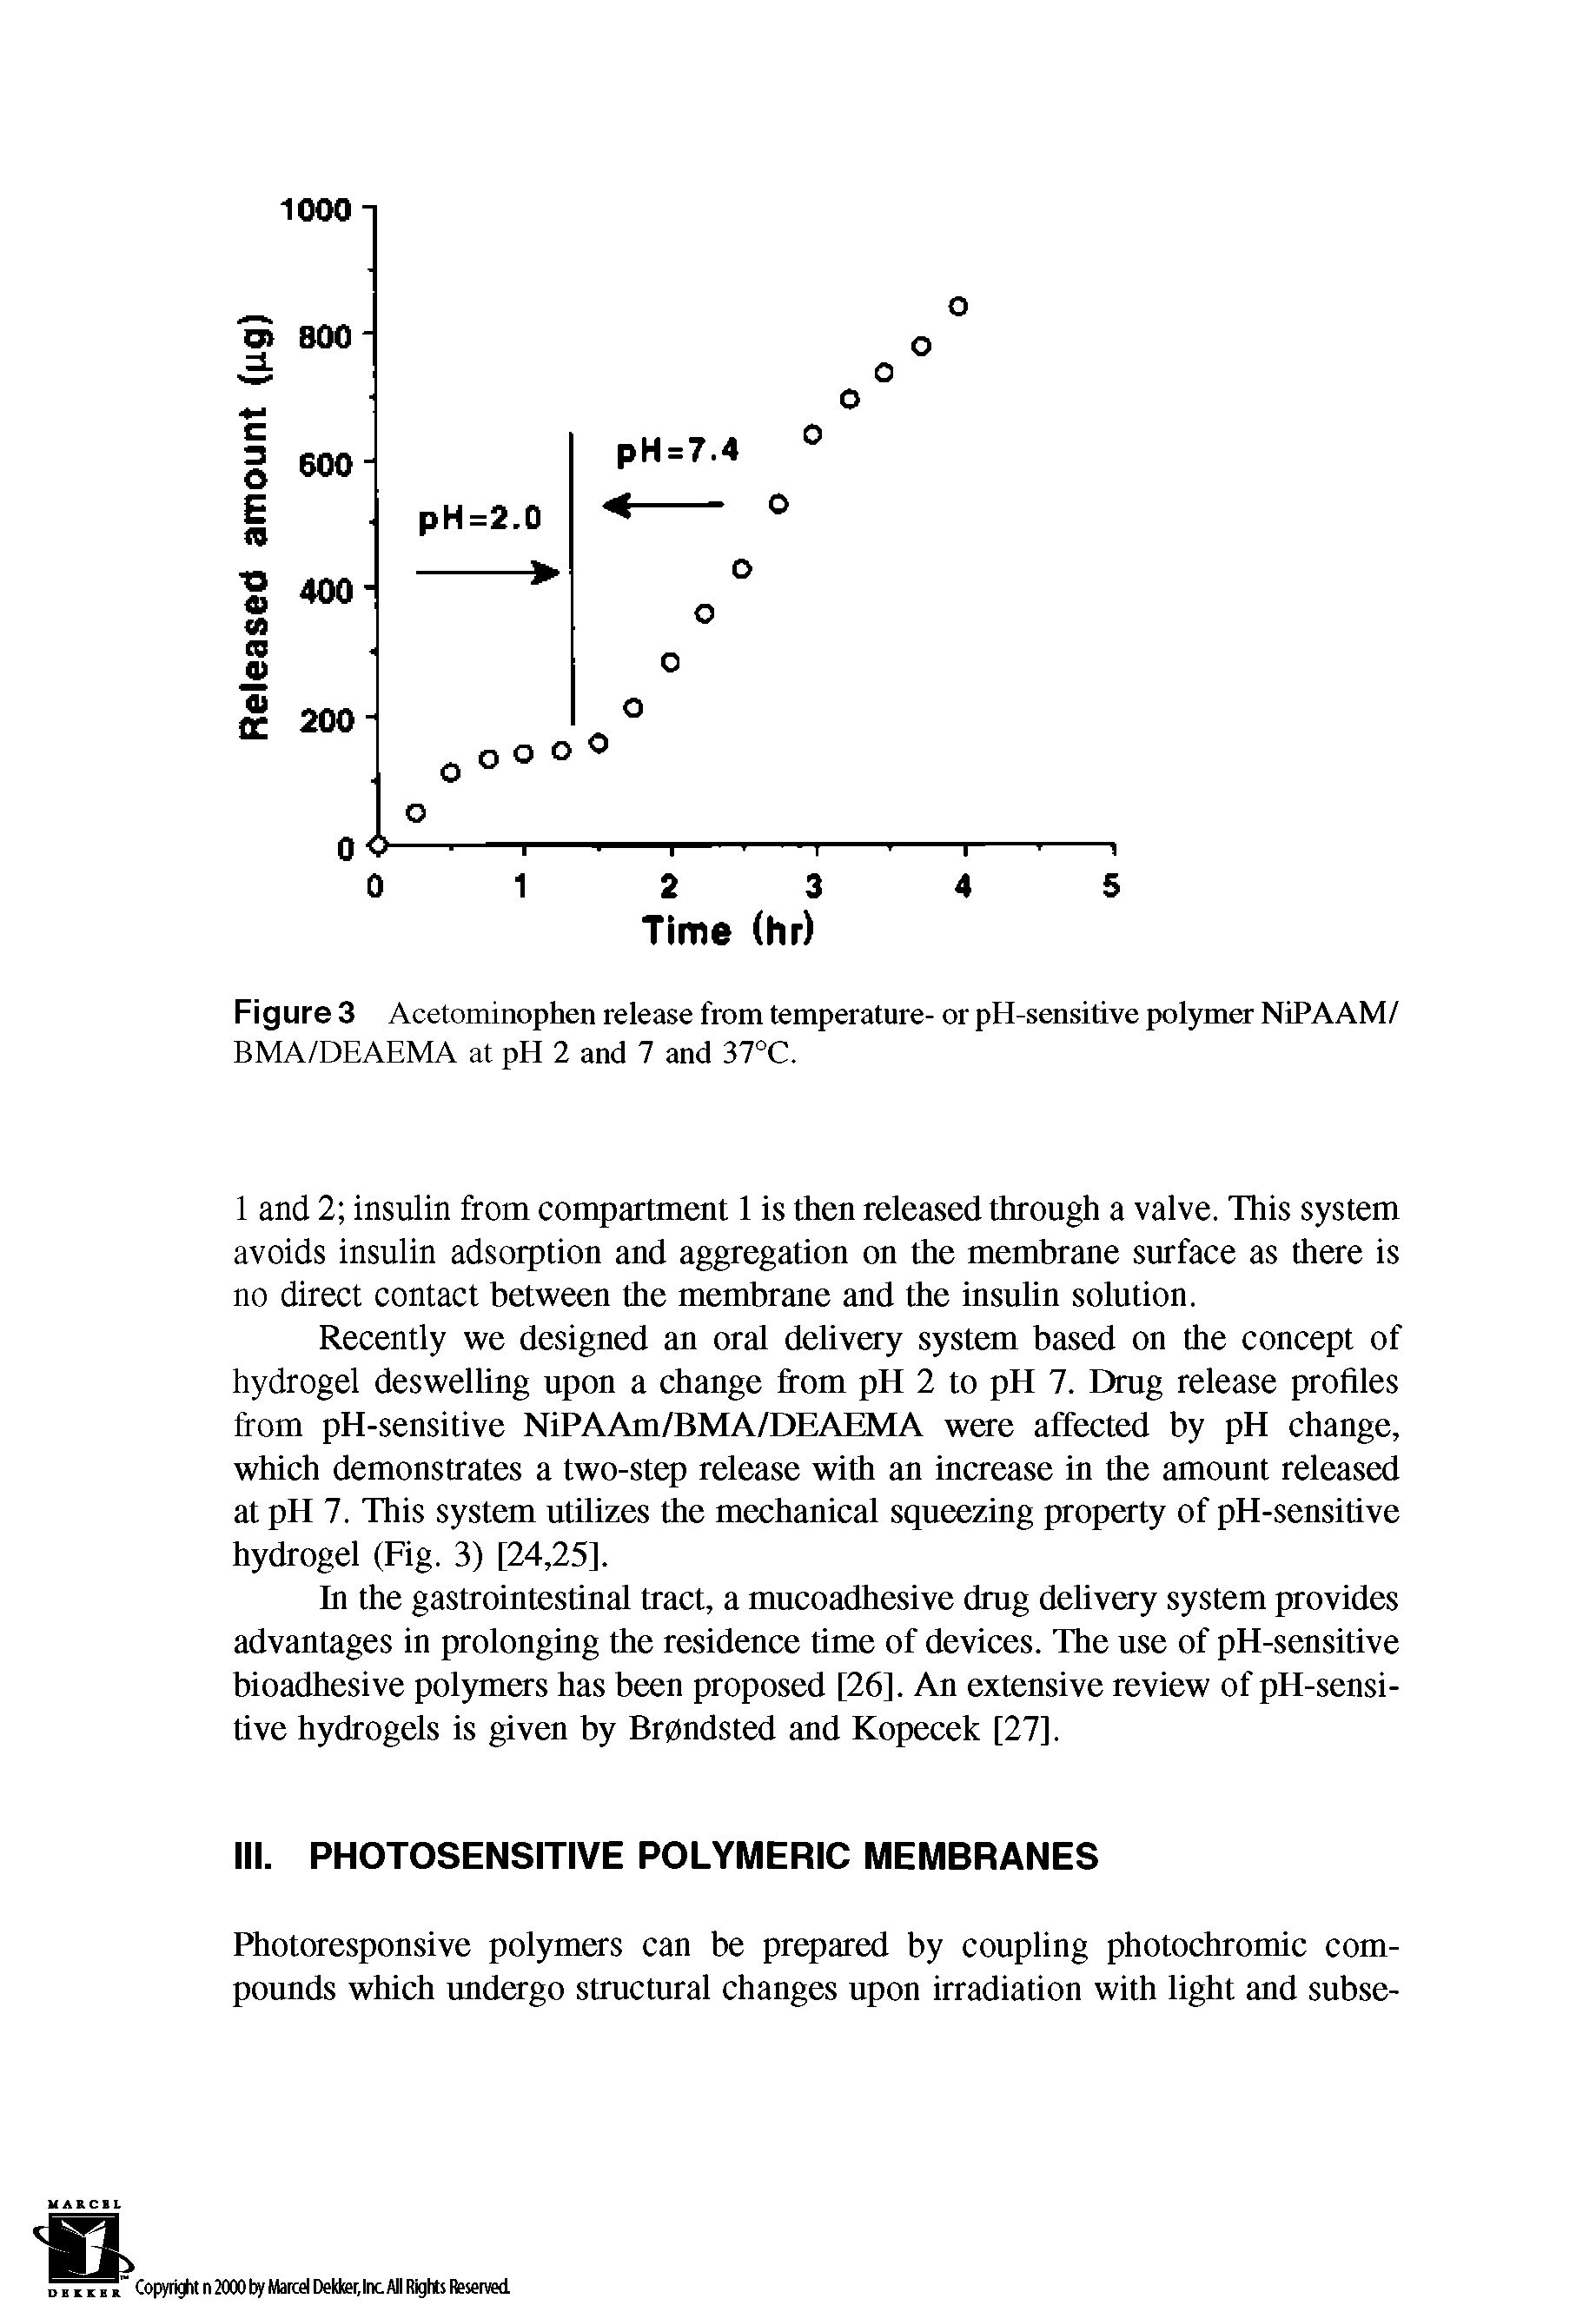 Figure 3 Acetaminophen release from temperature- or pH-sensitive polymer NiPAAM/ BMA/DEAEMA at pH 2 and 7 and 37°C.